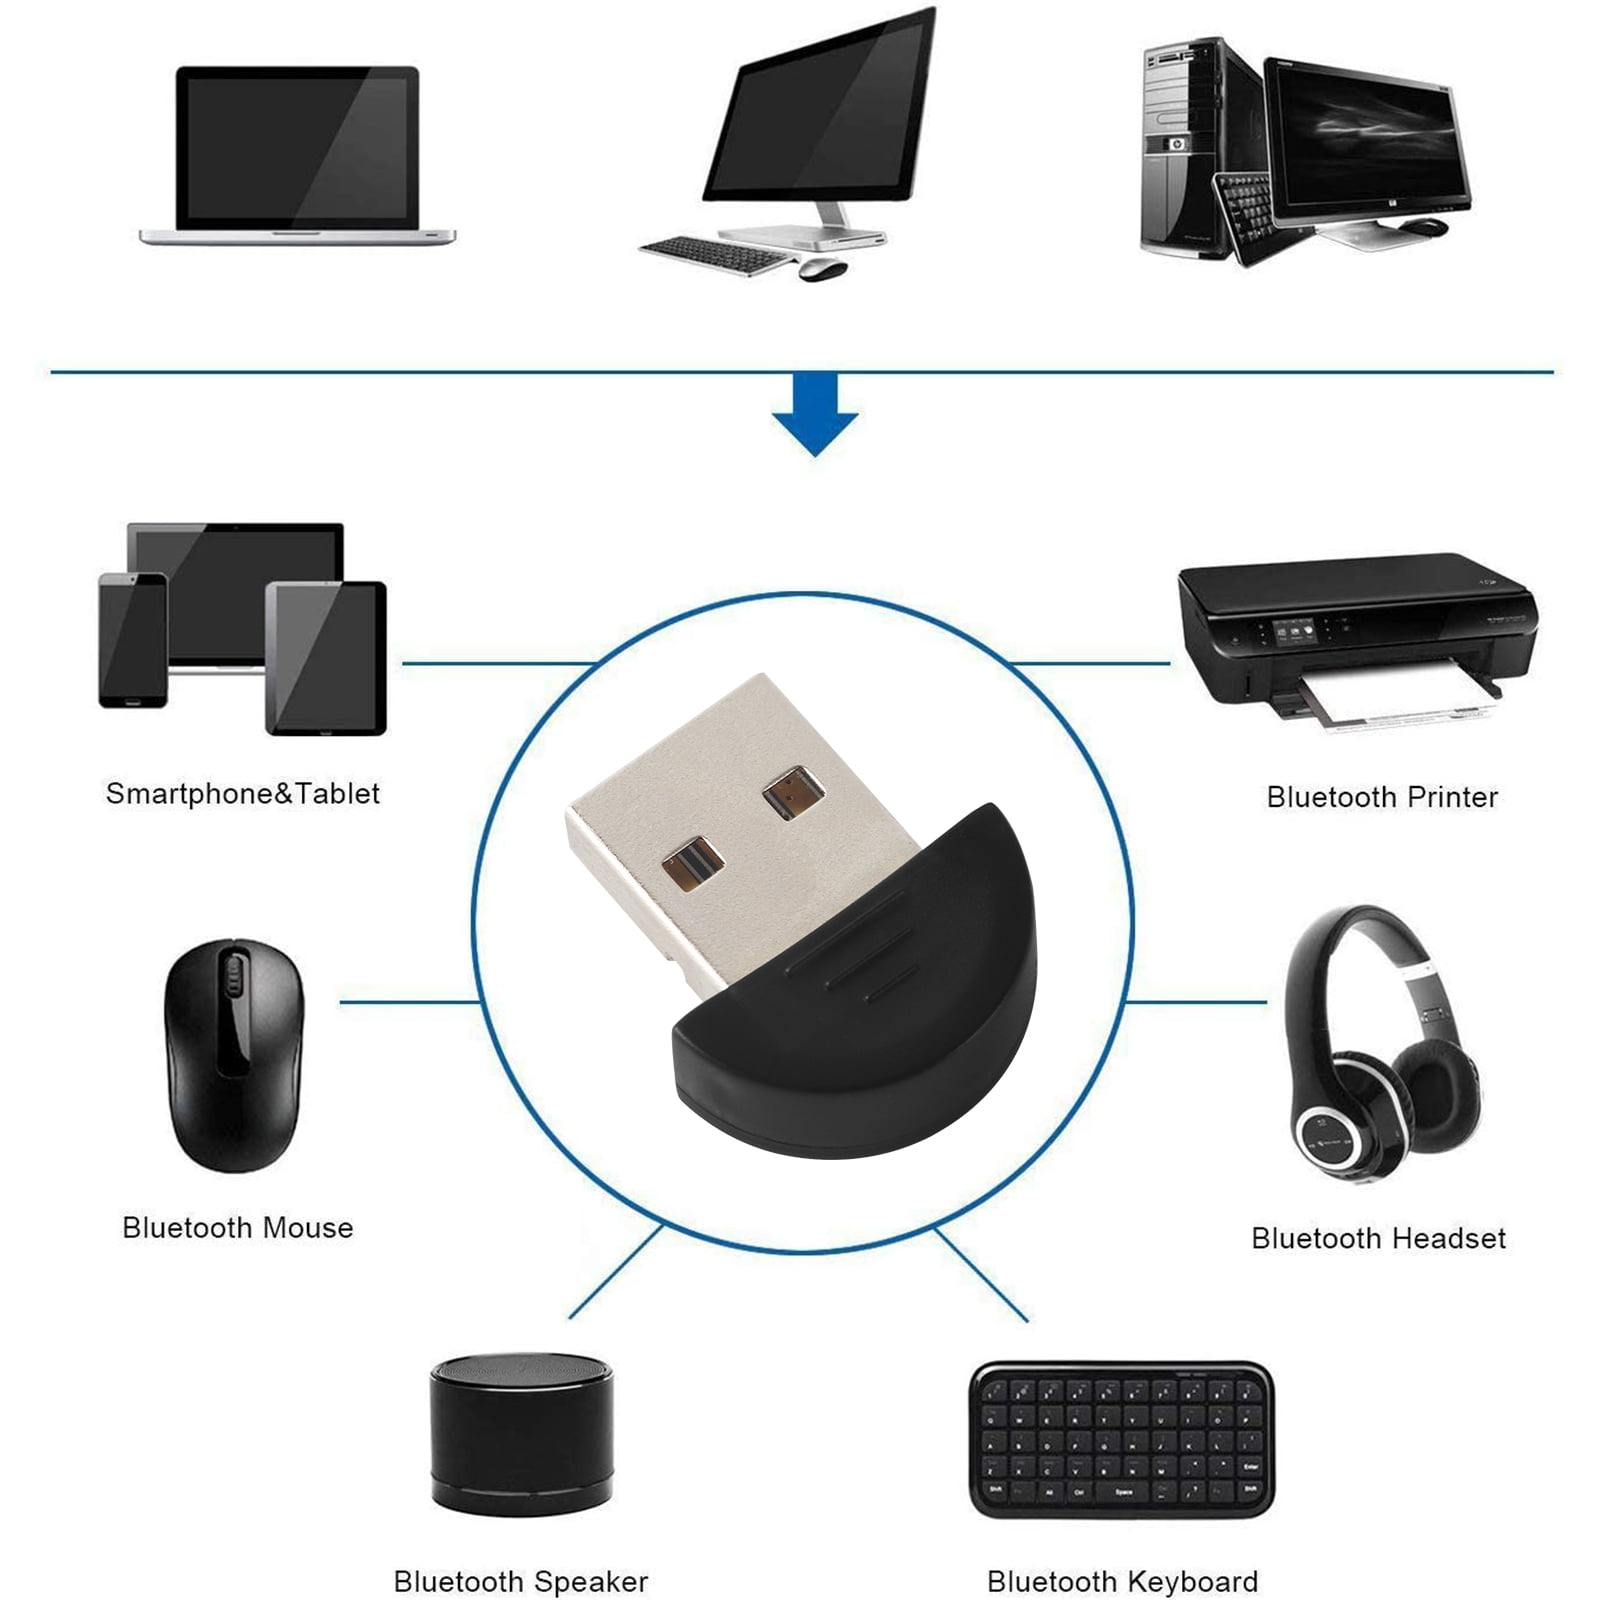 Elec Space USB Bluetooth Adapter for Desktop, Laptop, Mouse, Keyboard,  Printers, Headsets, PS4/ Xbox Controllers 